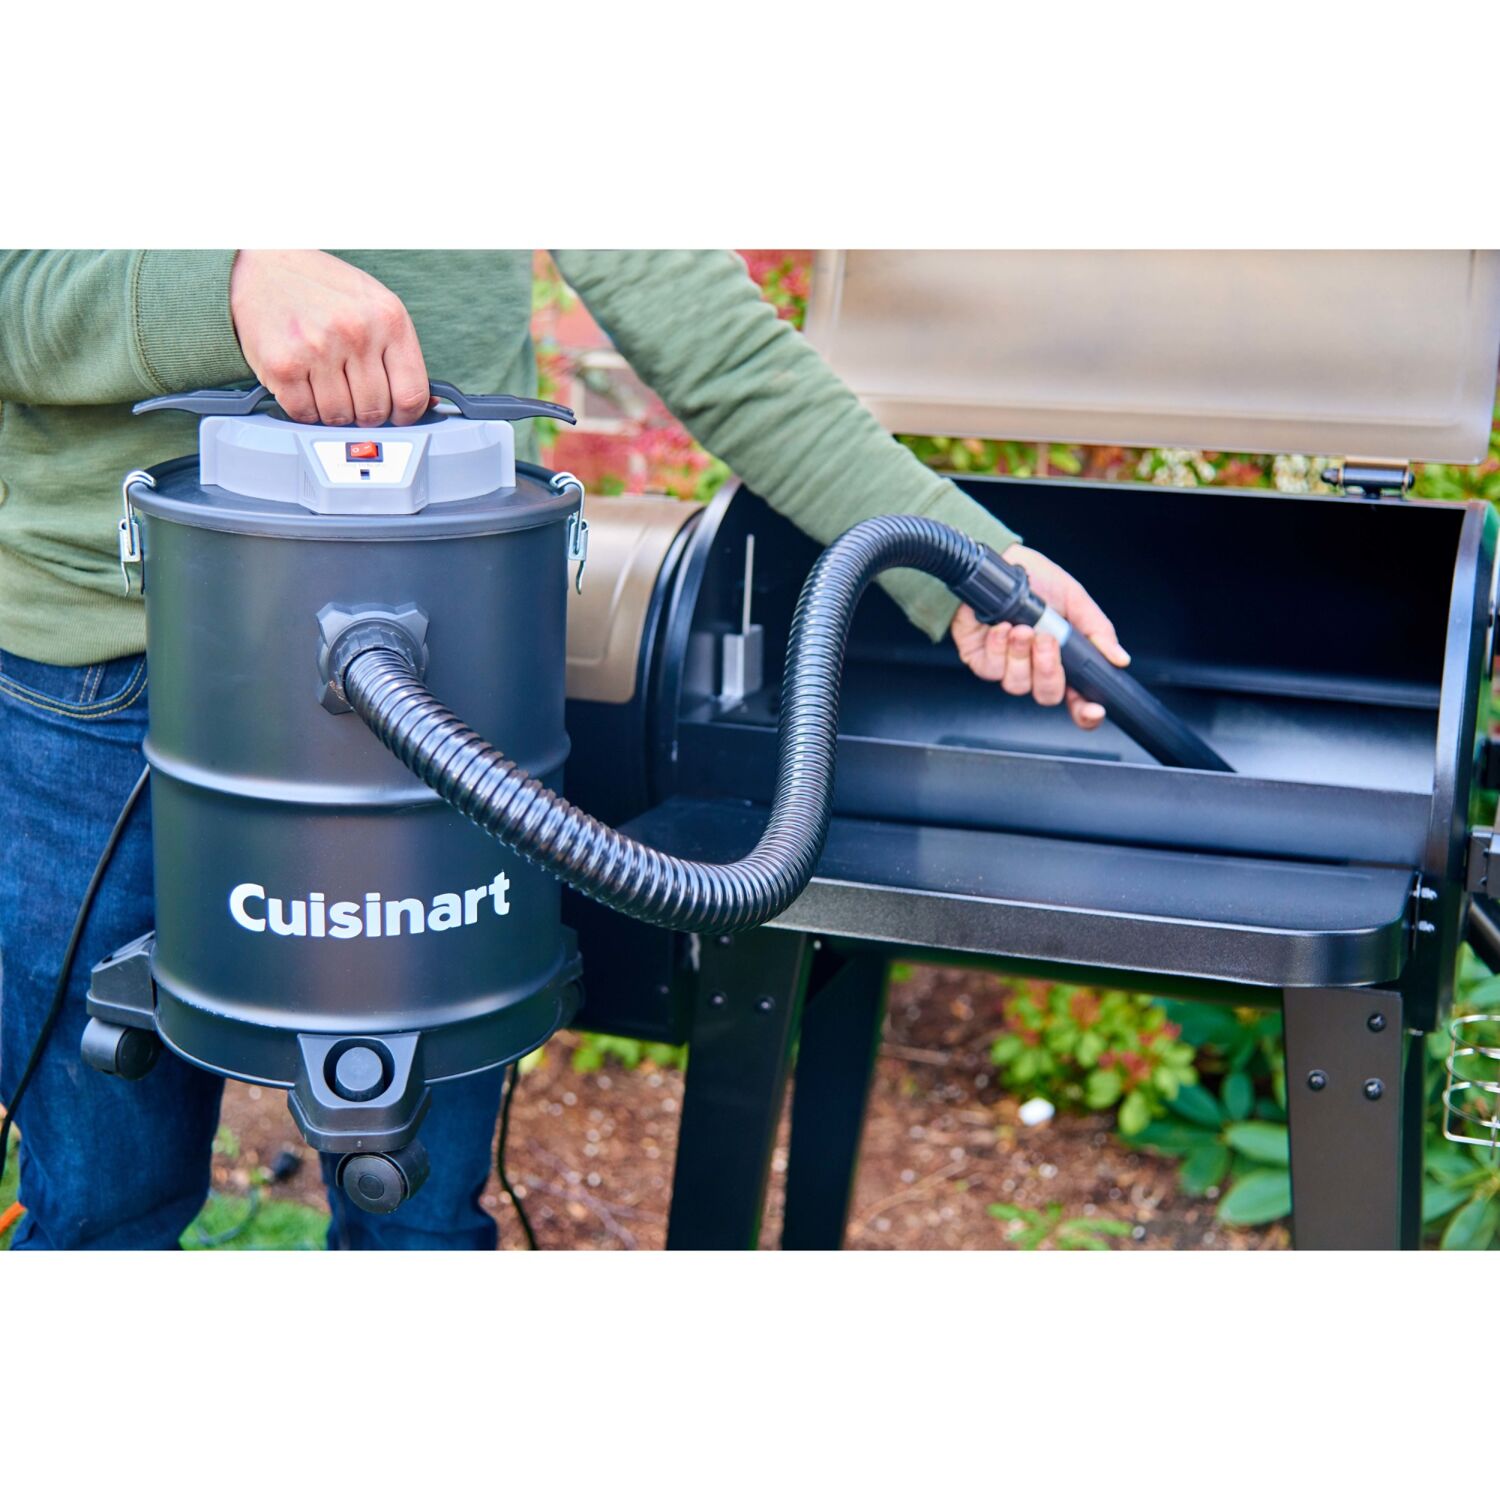 Cuisinart Cold Ash Vacuum with Mutliple Cleaning Heads for BBQ Grills, Pellet Grills, Wood Stoves, Fire Pits - image 4 of 7